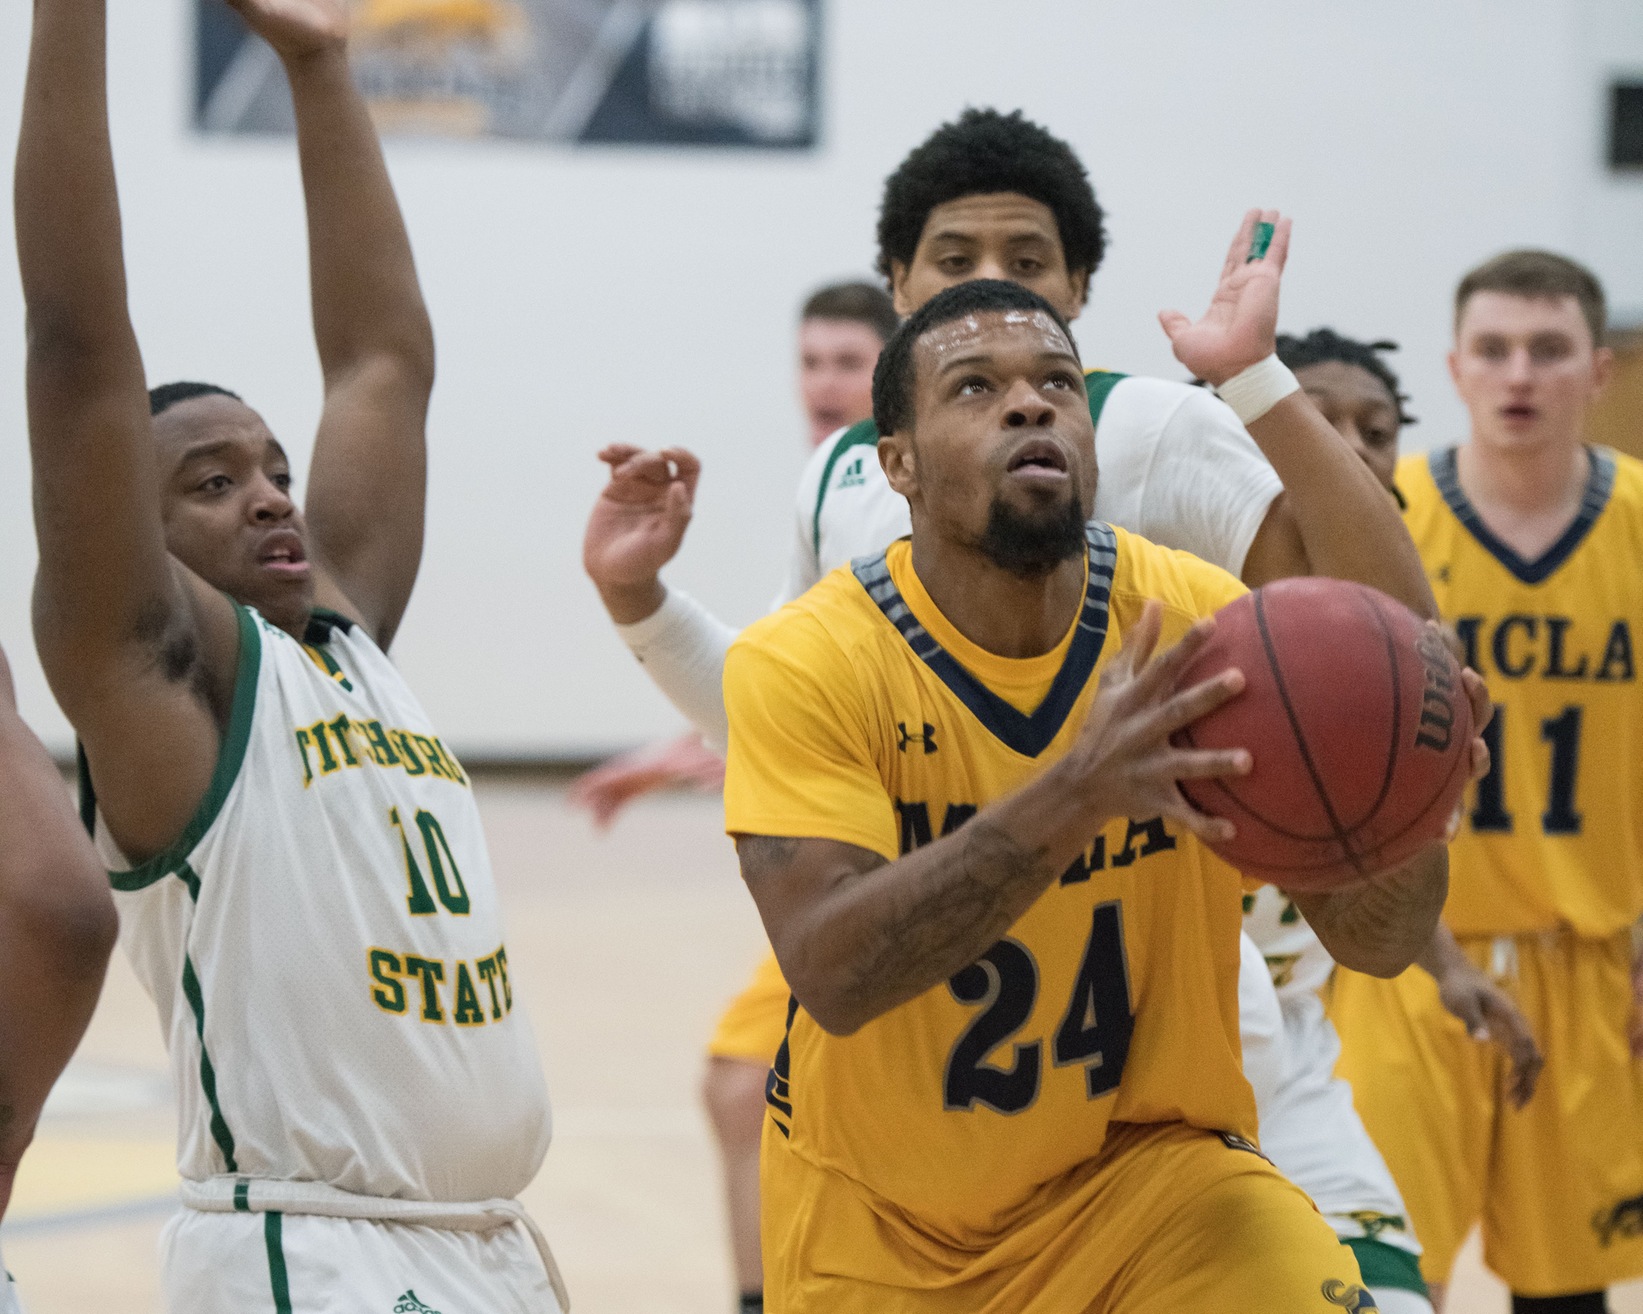 Men's Basketball struggles with first place Vikings as they fall 103-77